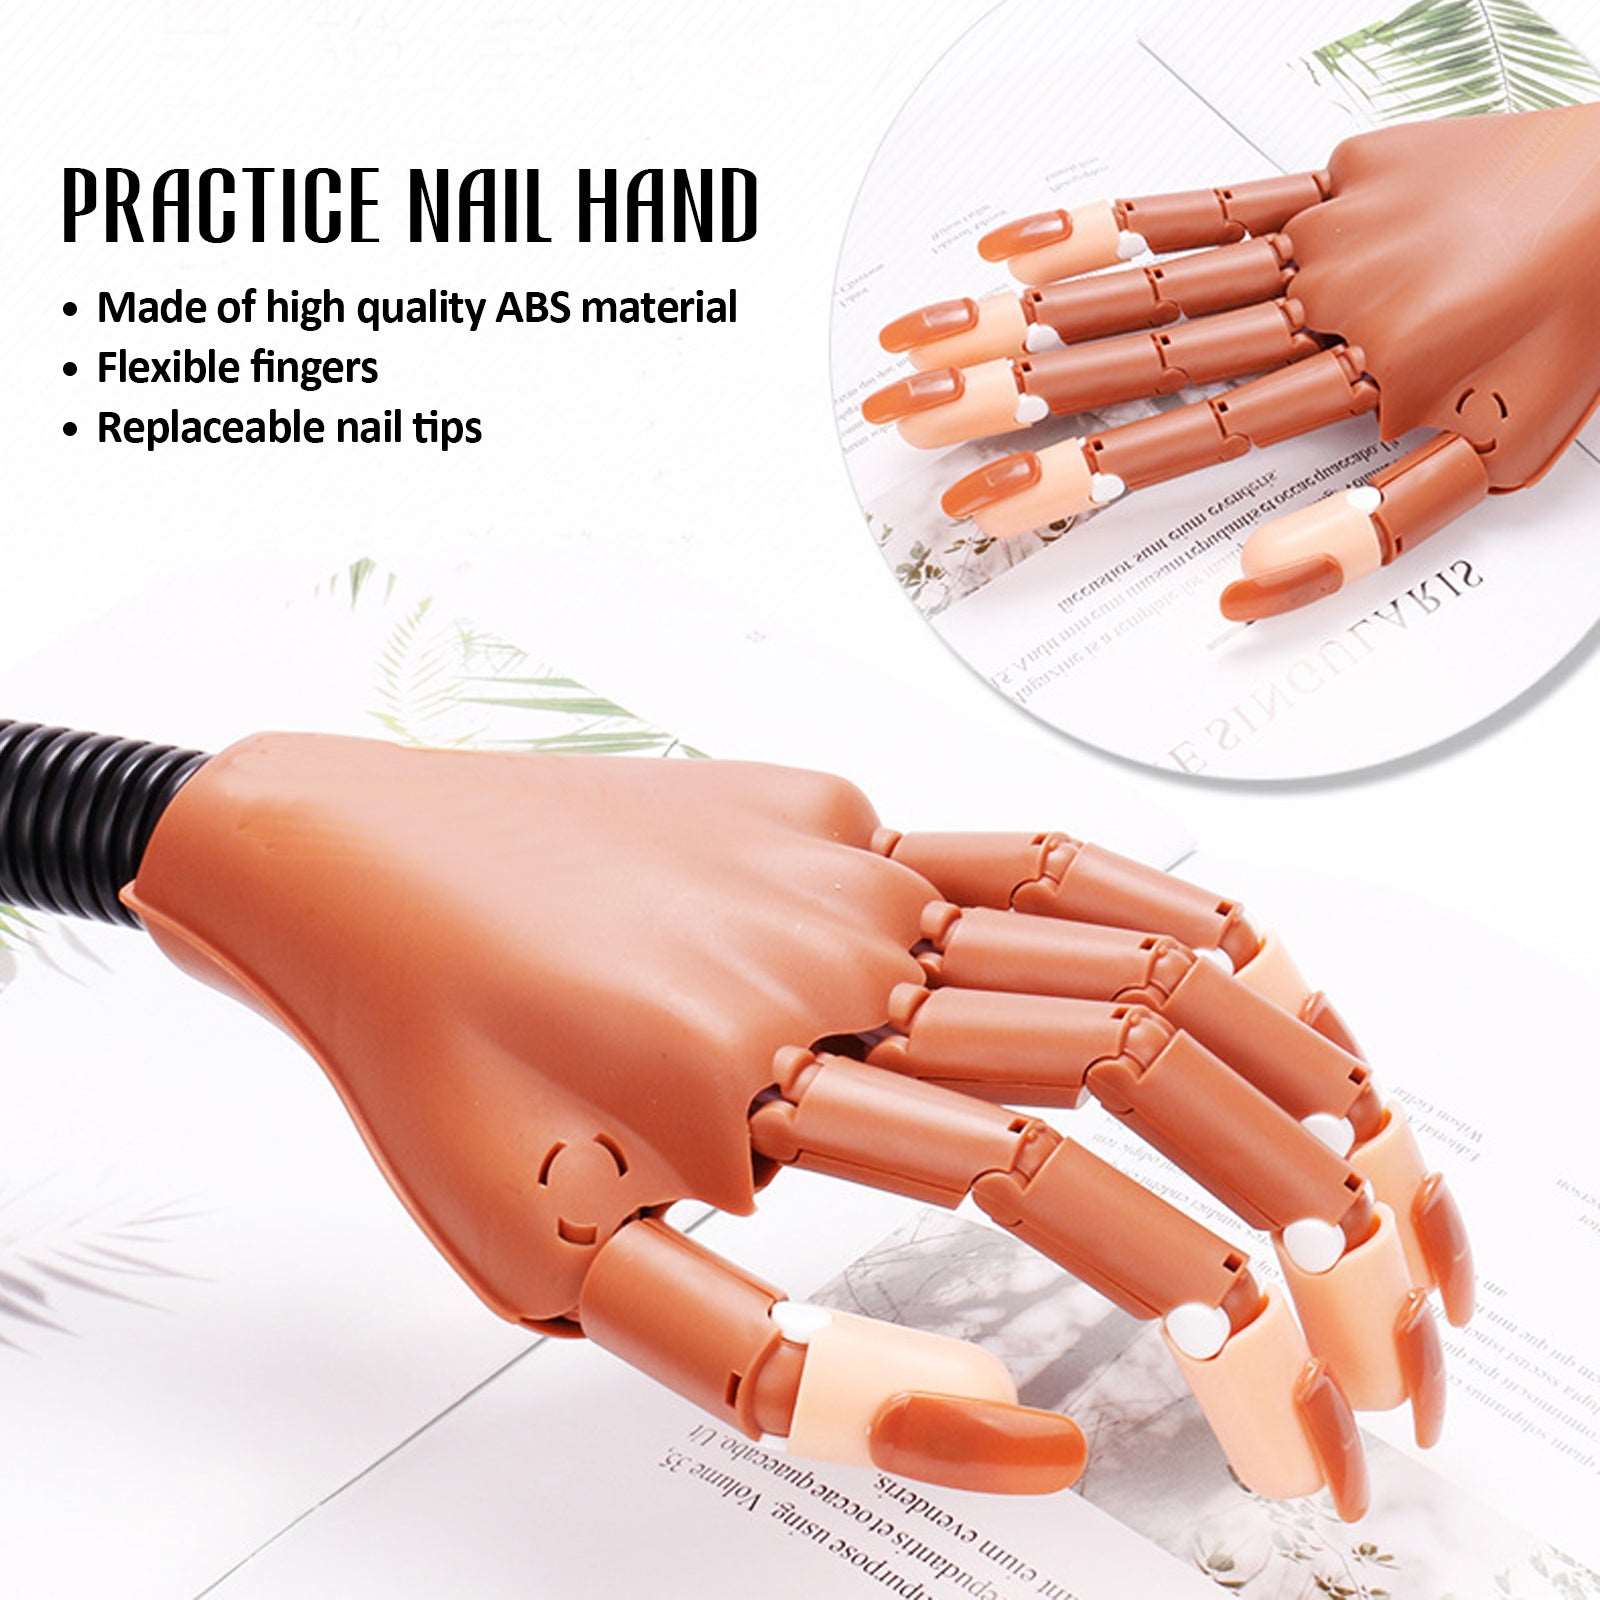 Veikmv Nail Training Practice Hand For Acrylic Nails Silicone Fake Hands To  Nail Practice Hand Model Filming Props - AliExpress